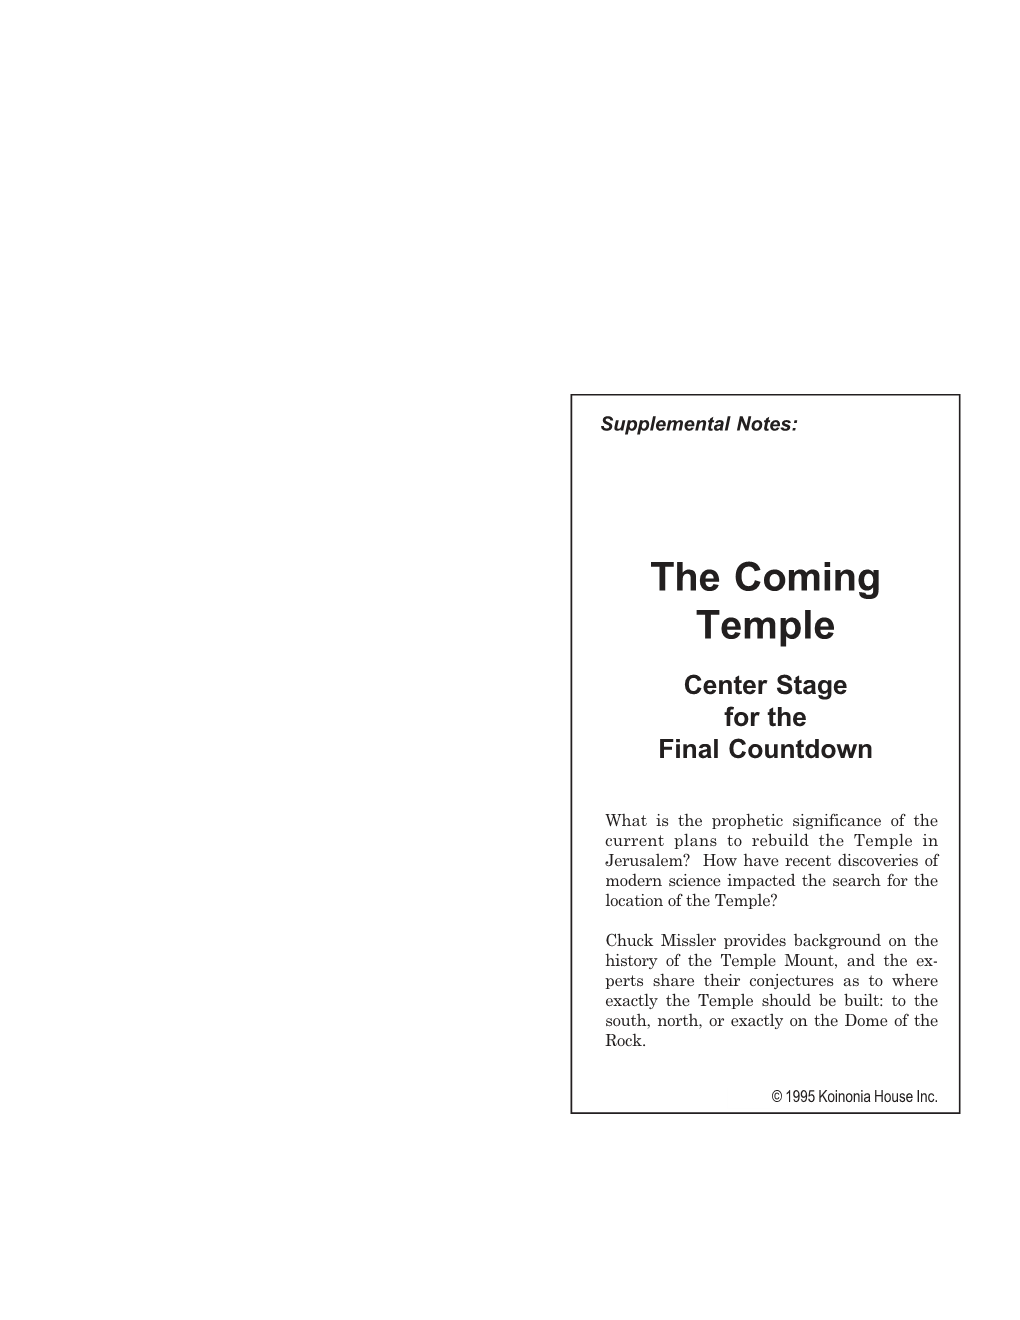 The Coming Temple: Update